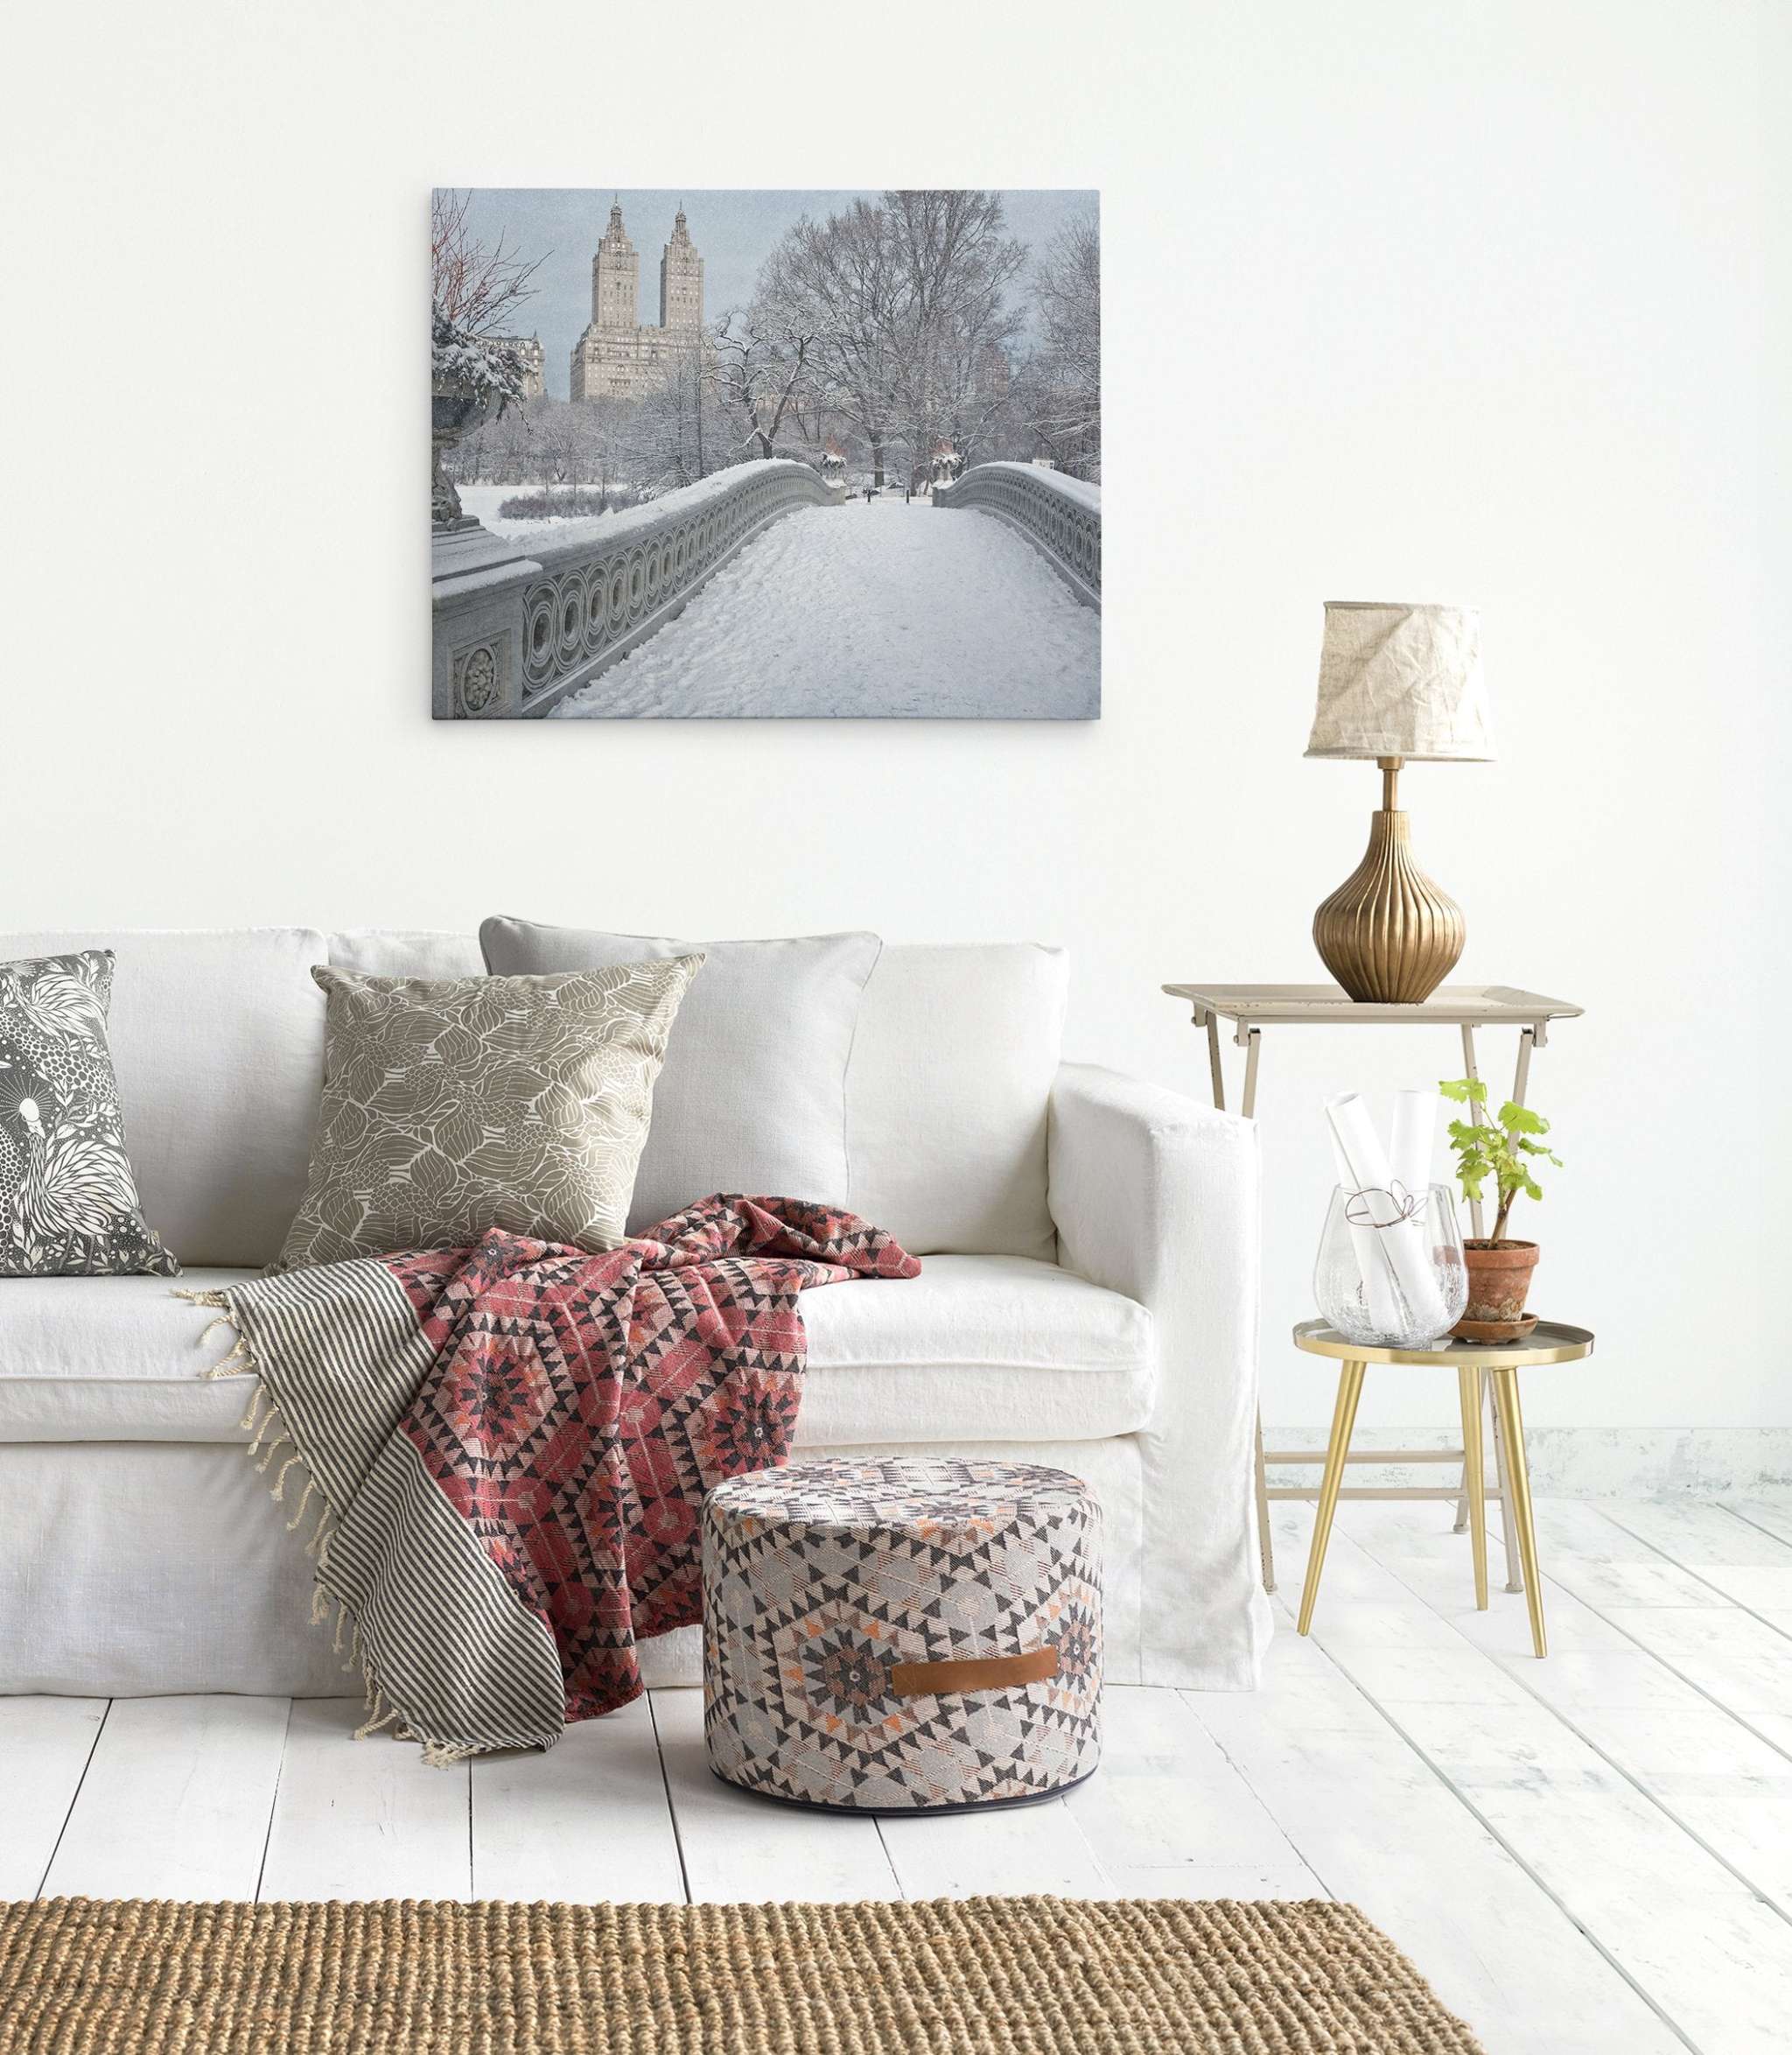 A cozy living room features a light beige sofa adorned with patterned pillows and a red and gray blanket. A patterned ottoman and rug complement the space. Beside the sofa is a small table with a lamp, plant, and books. An Offley Green New York City Canvas Wall Art, 'Snow on Bow Bridge' hangs on the white wall.